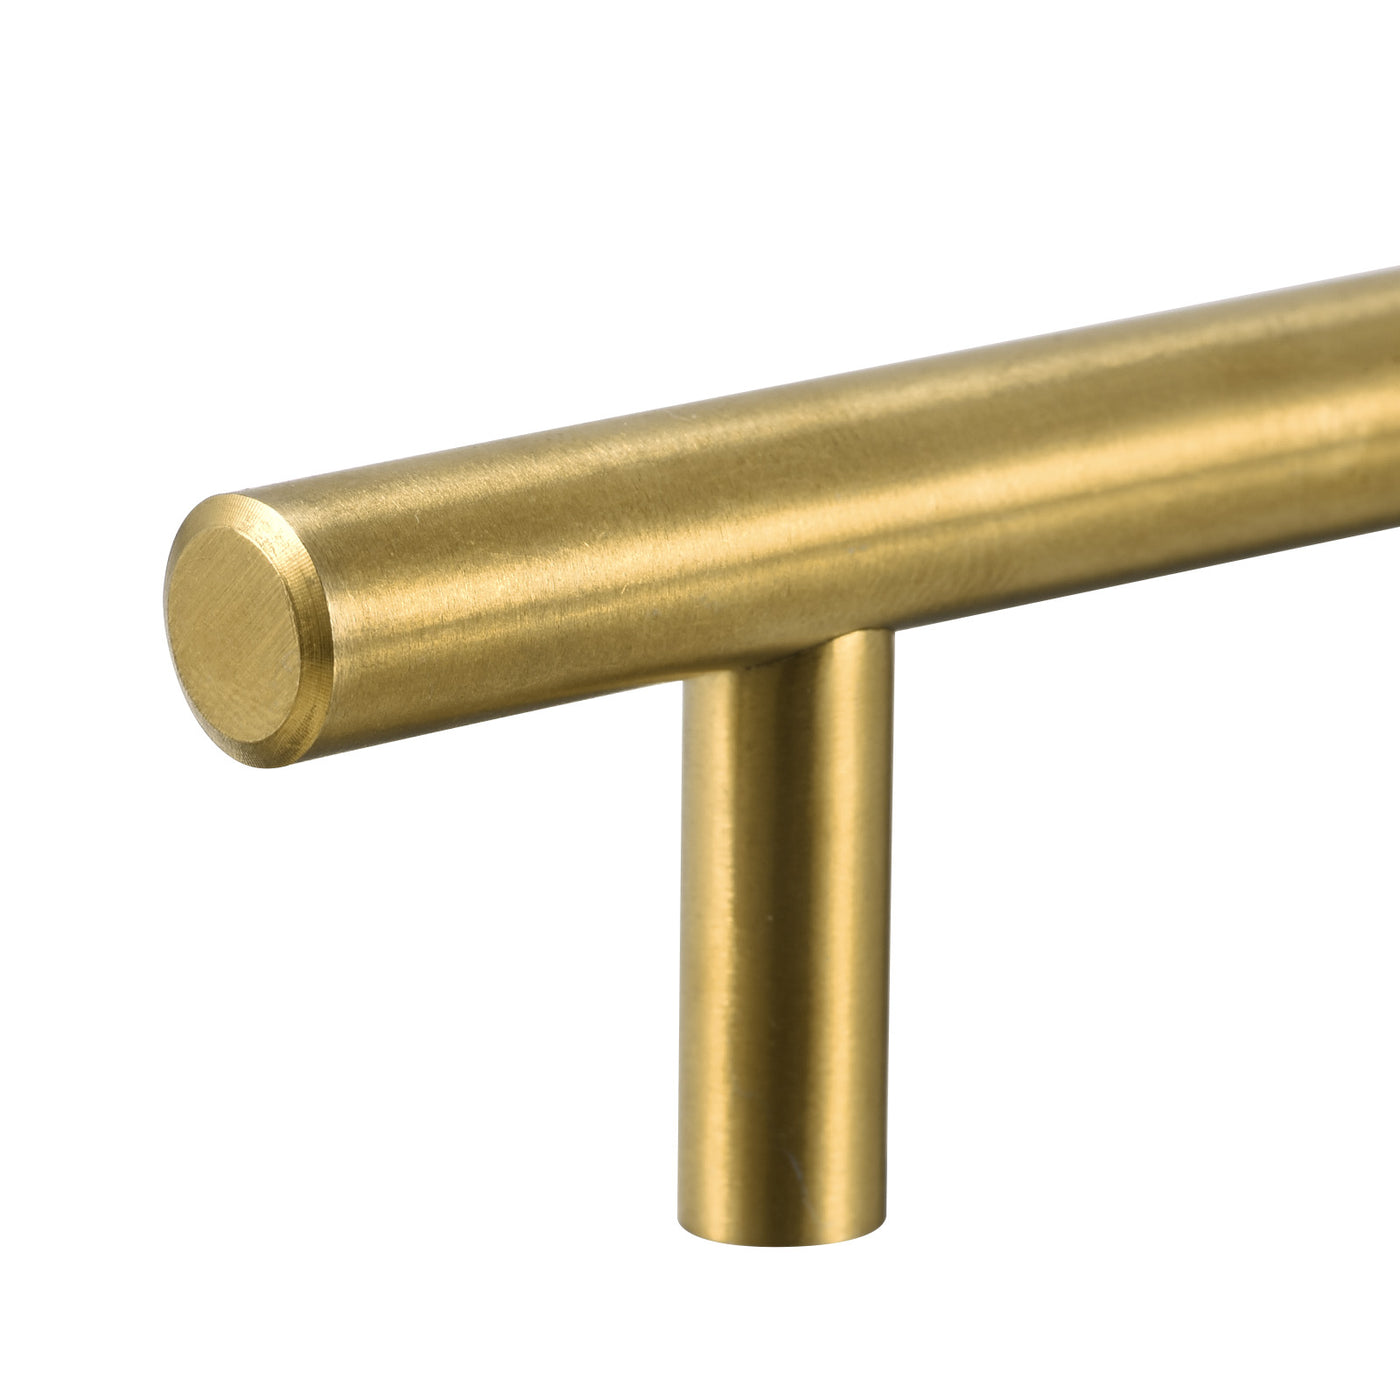 uxcell Uxcell T Bar Pull Handle, 8"(200mm) Length 10mm Dia Stainless Steel Cabinet Pulls 5"(128mm) Hole Center Distance Gold Tone 4pcs